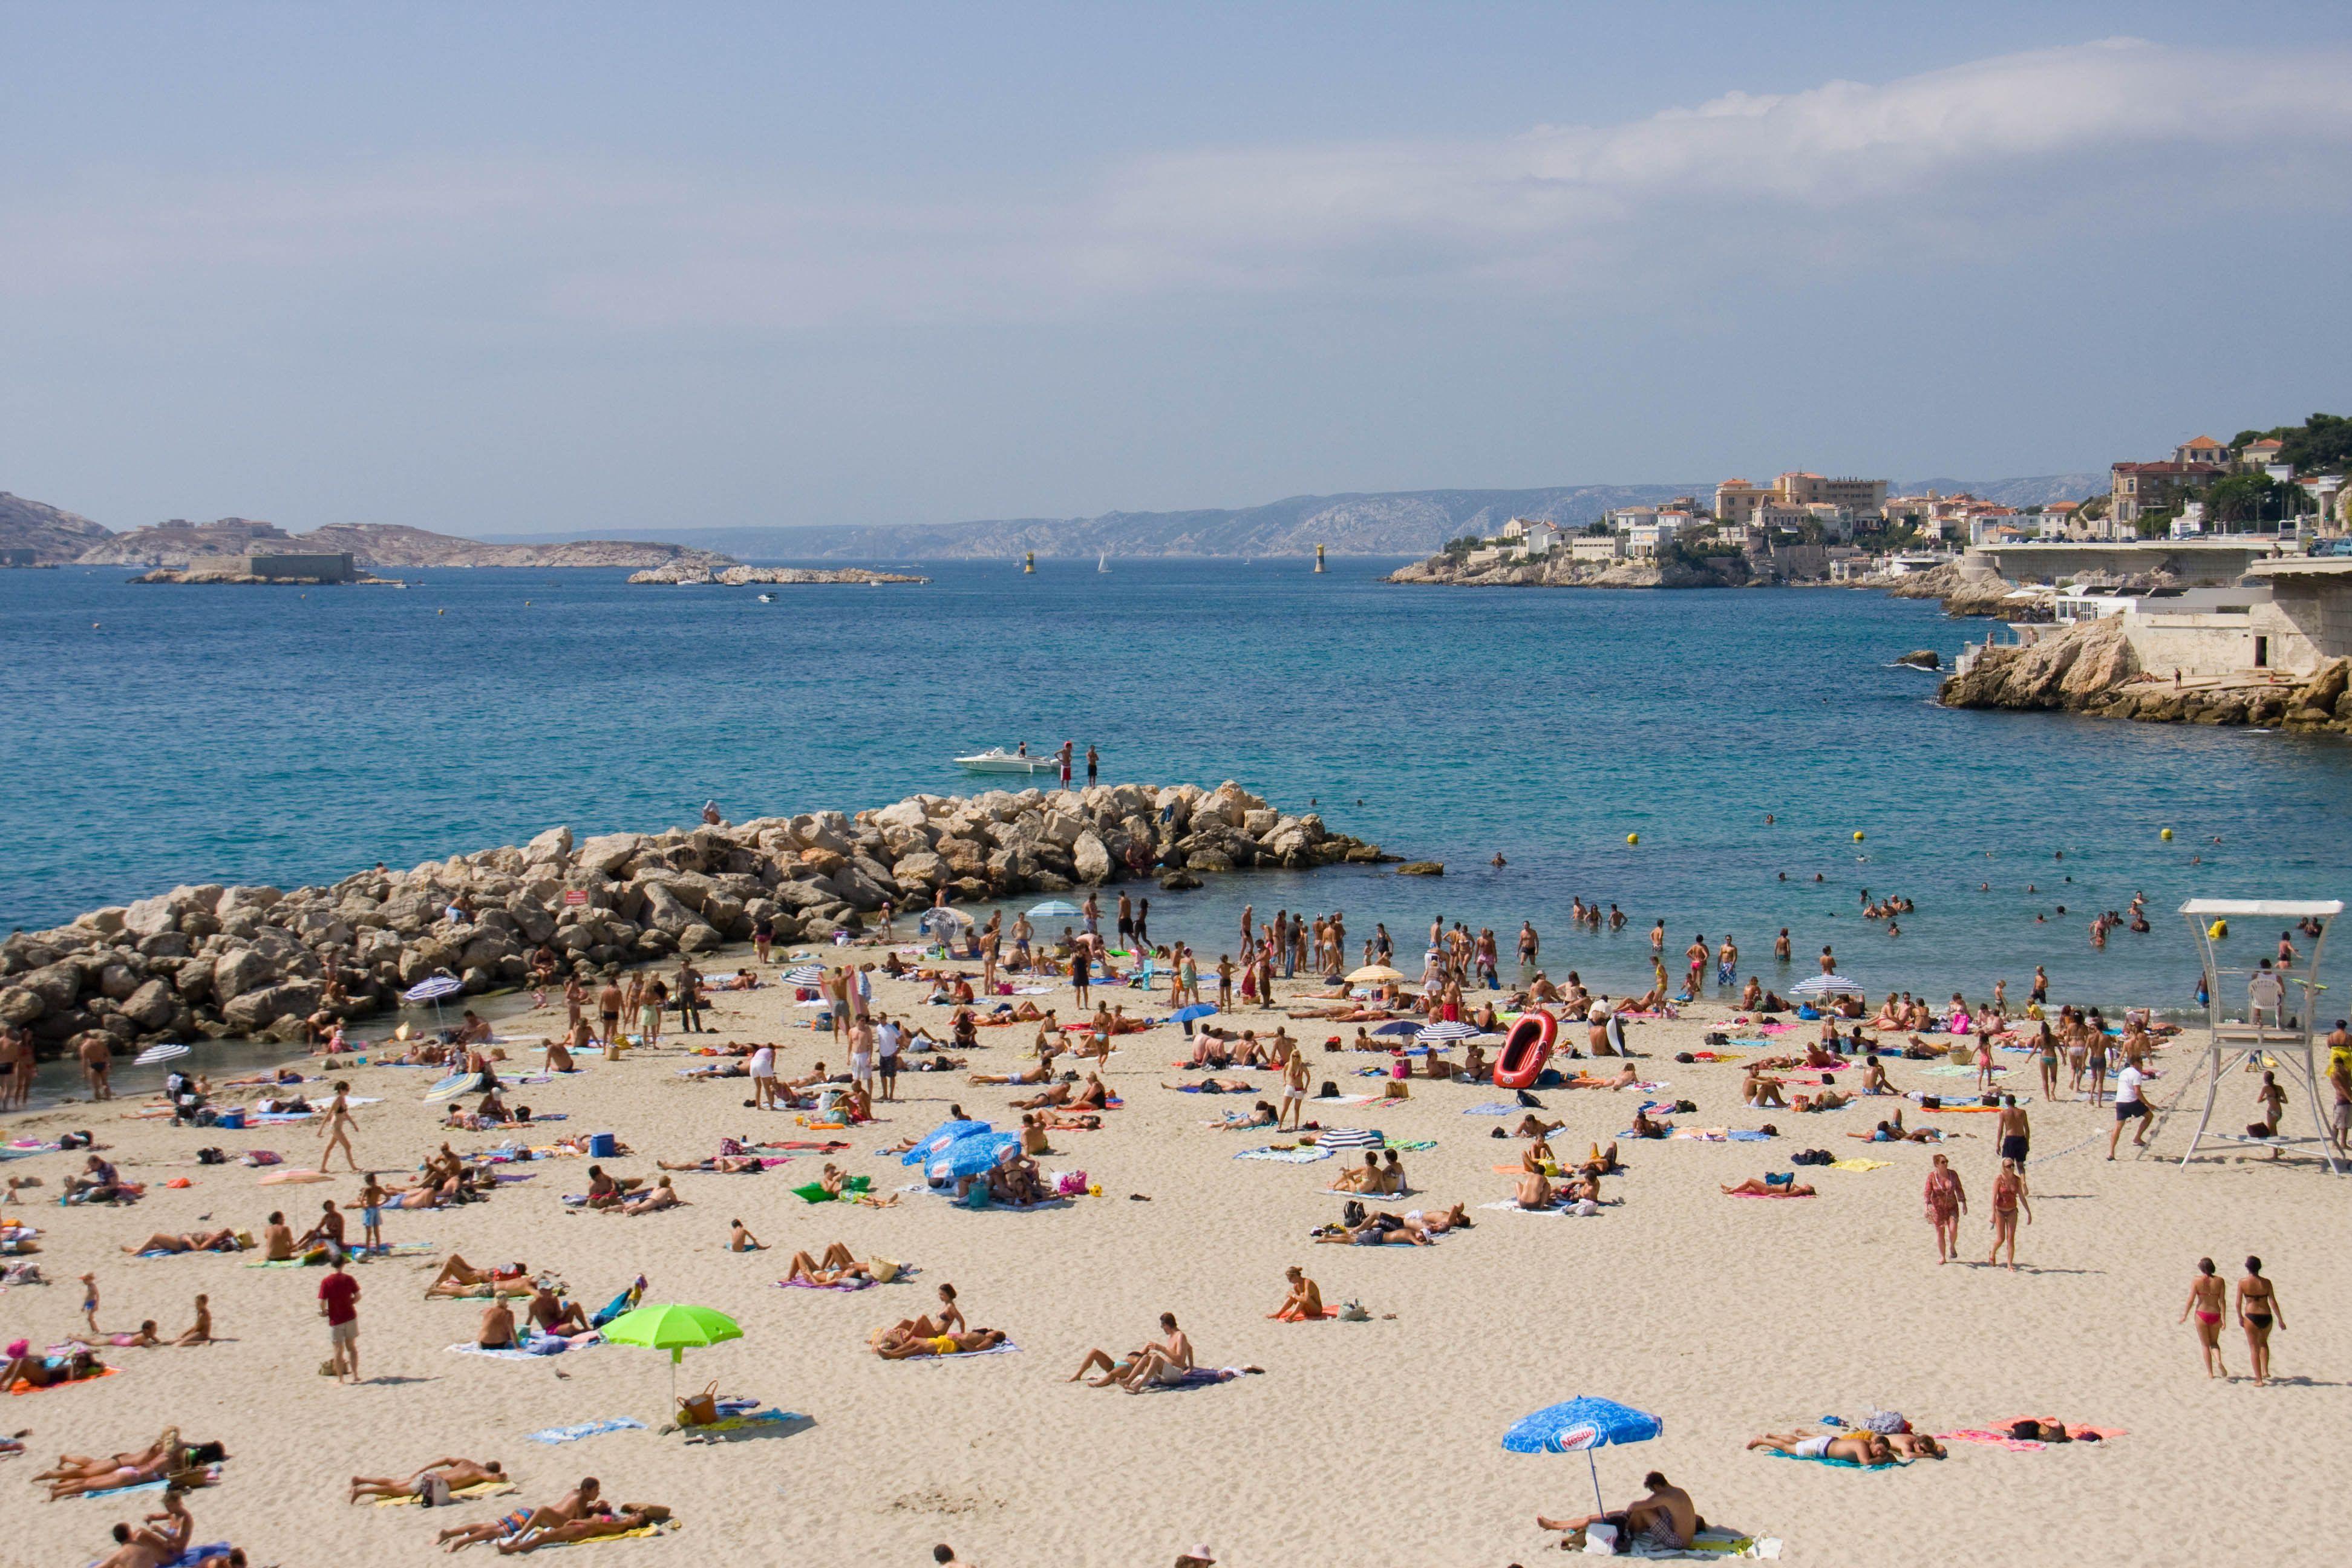 Beach hotels in Marseille, France wallpaper and image